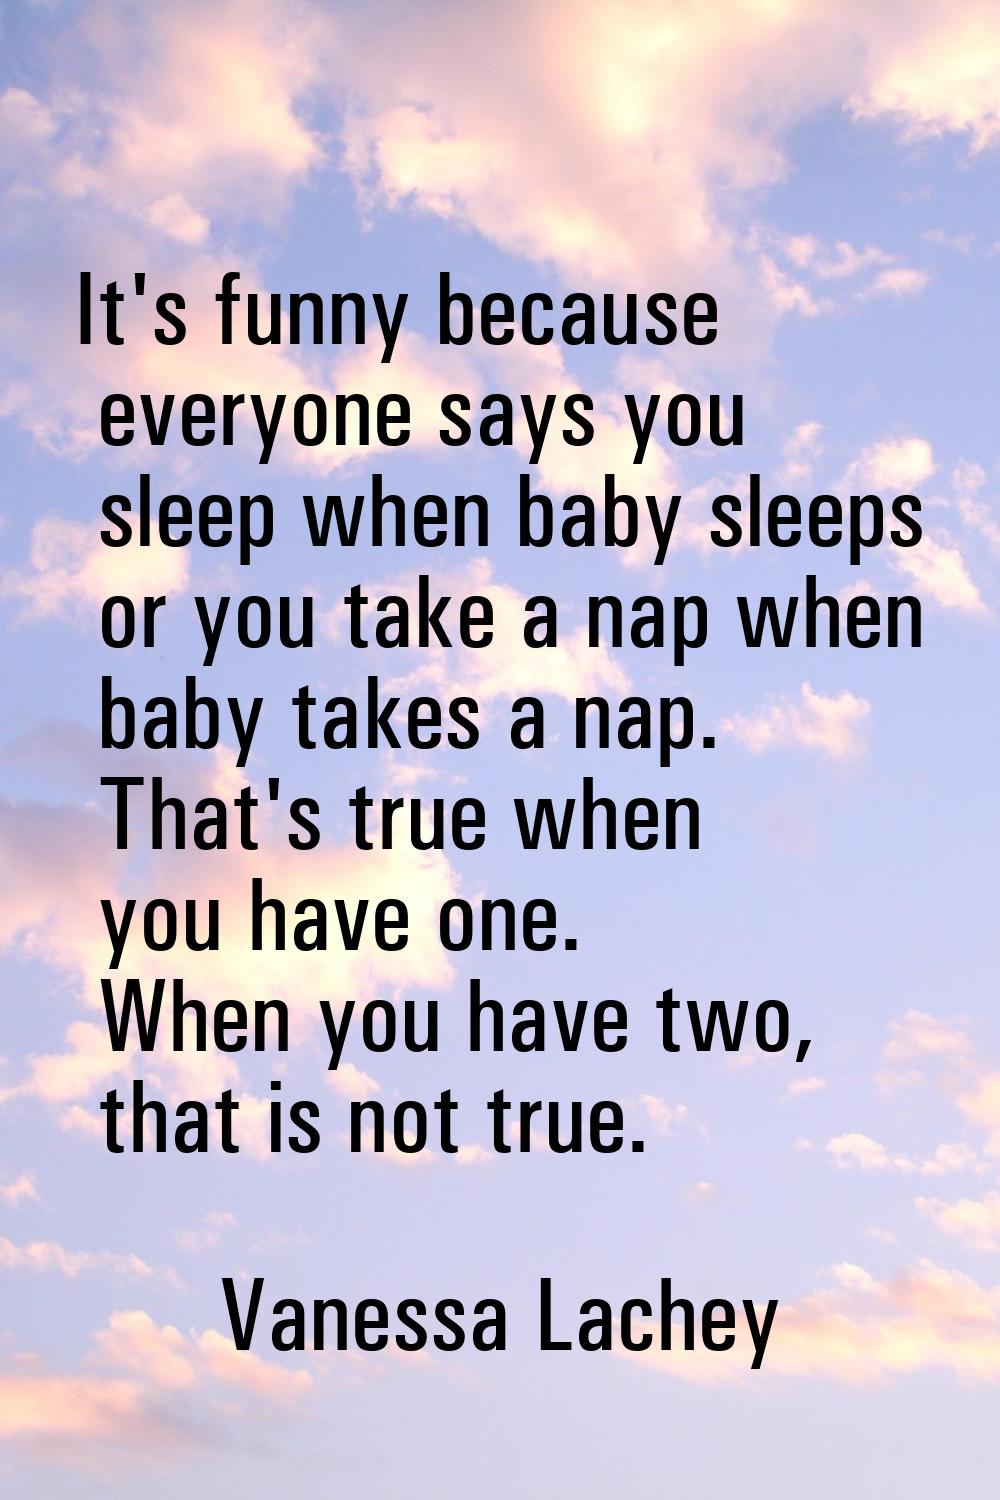 It's funny because everyone says you sleep when baby sleeps or you take a nap when baby takes a nap